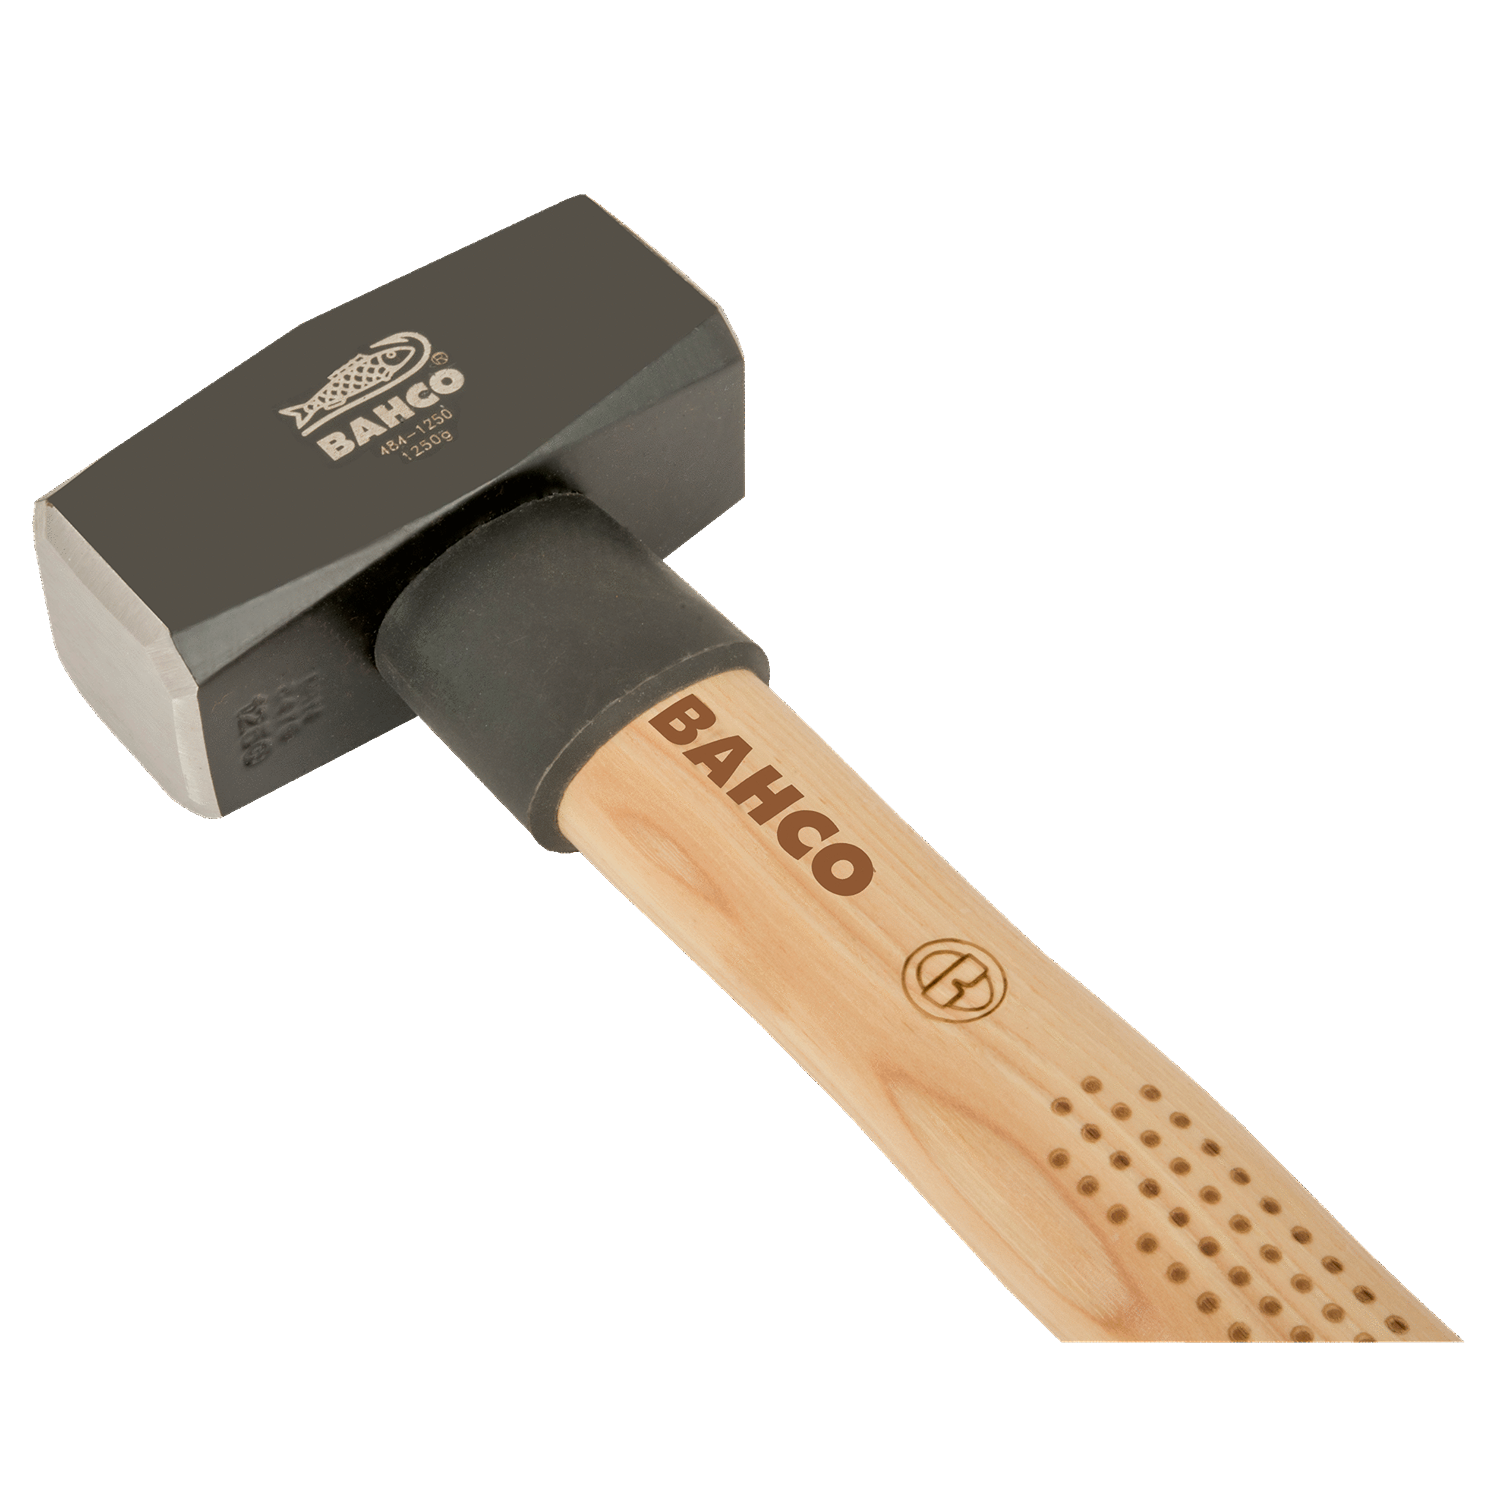 BAHCO 484 Club Hammer with Hickory Handle (BAHCO Tools) - Premium Club Hammer from BAHCO - Shop now at Yew Aik.